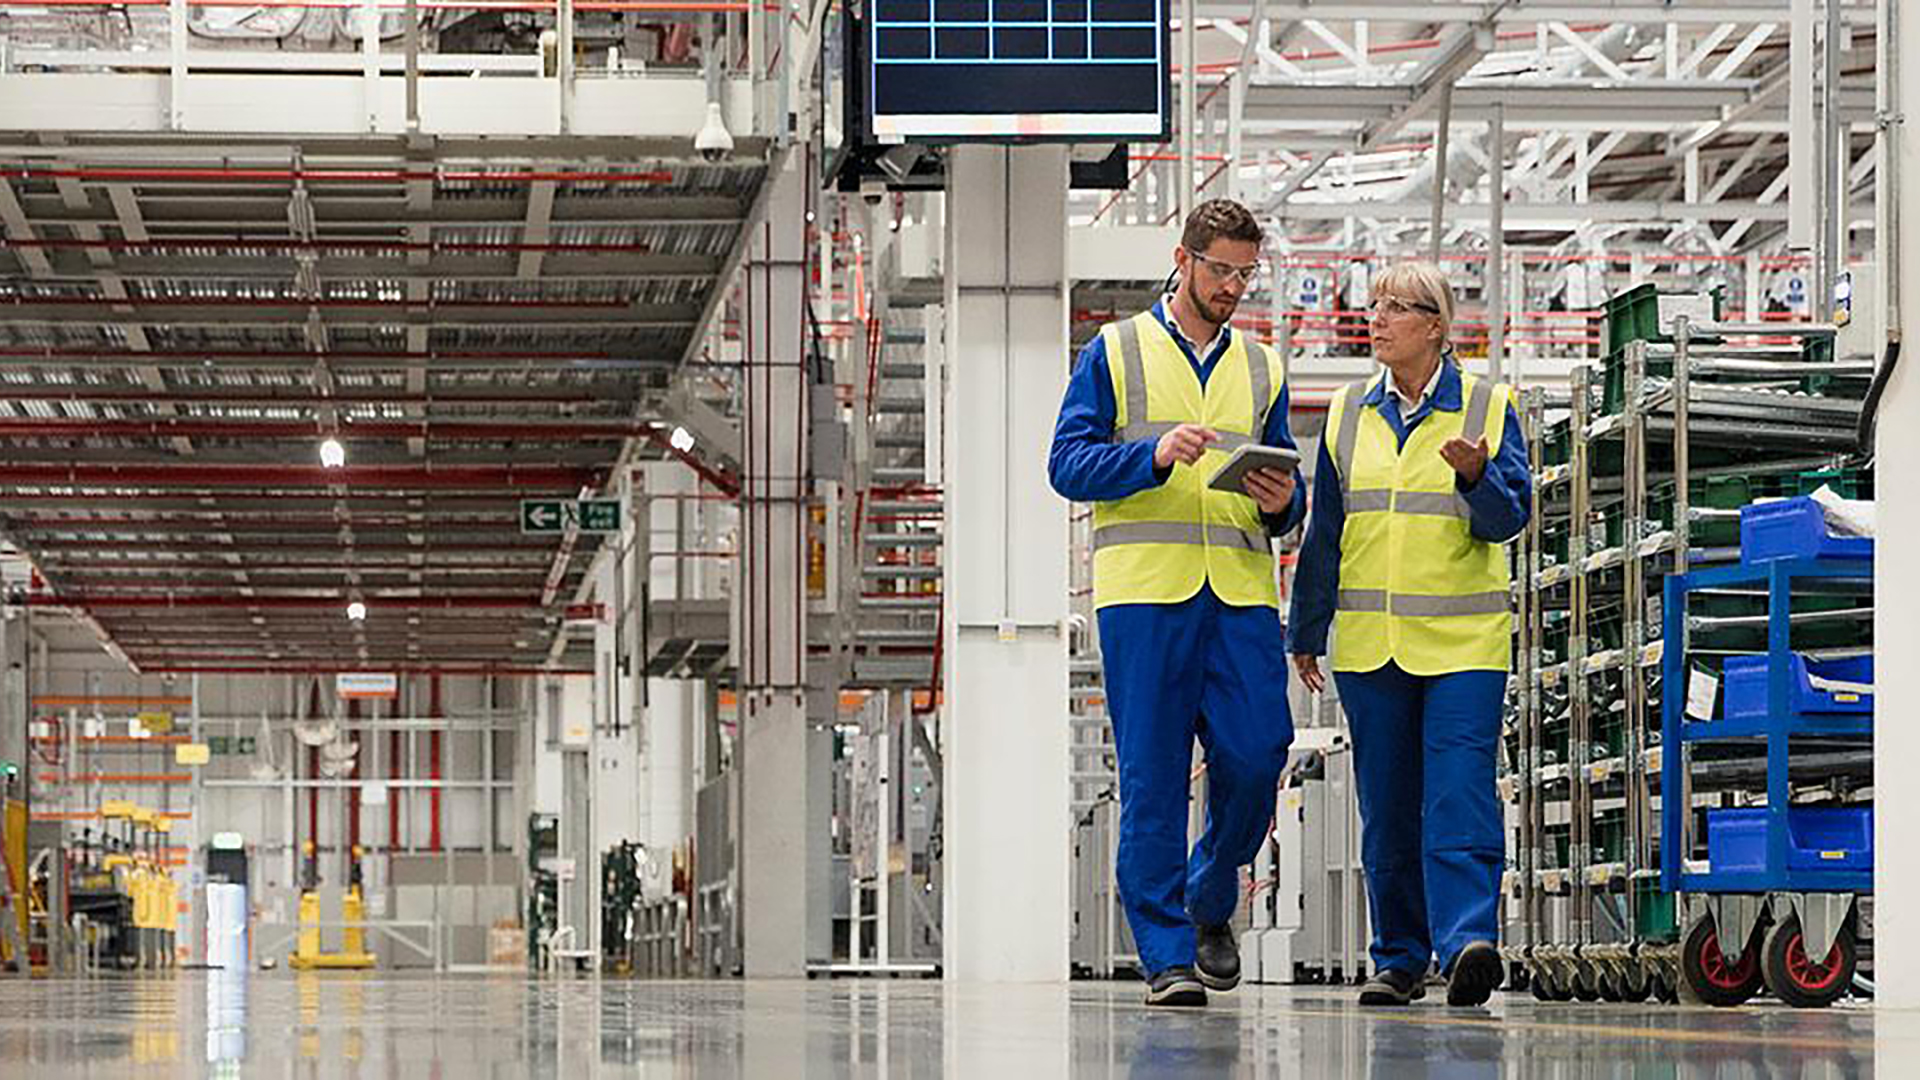 DELMIAWorks customers reduce inventory costs, eliminate downtime, control quality, automate their plant floors and gain visibility throughout their supply chains